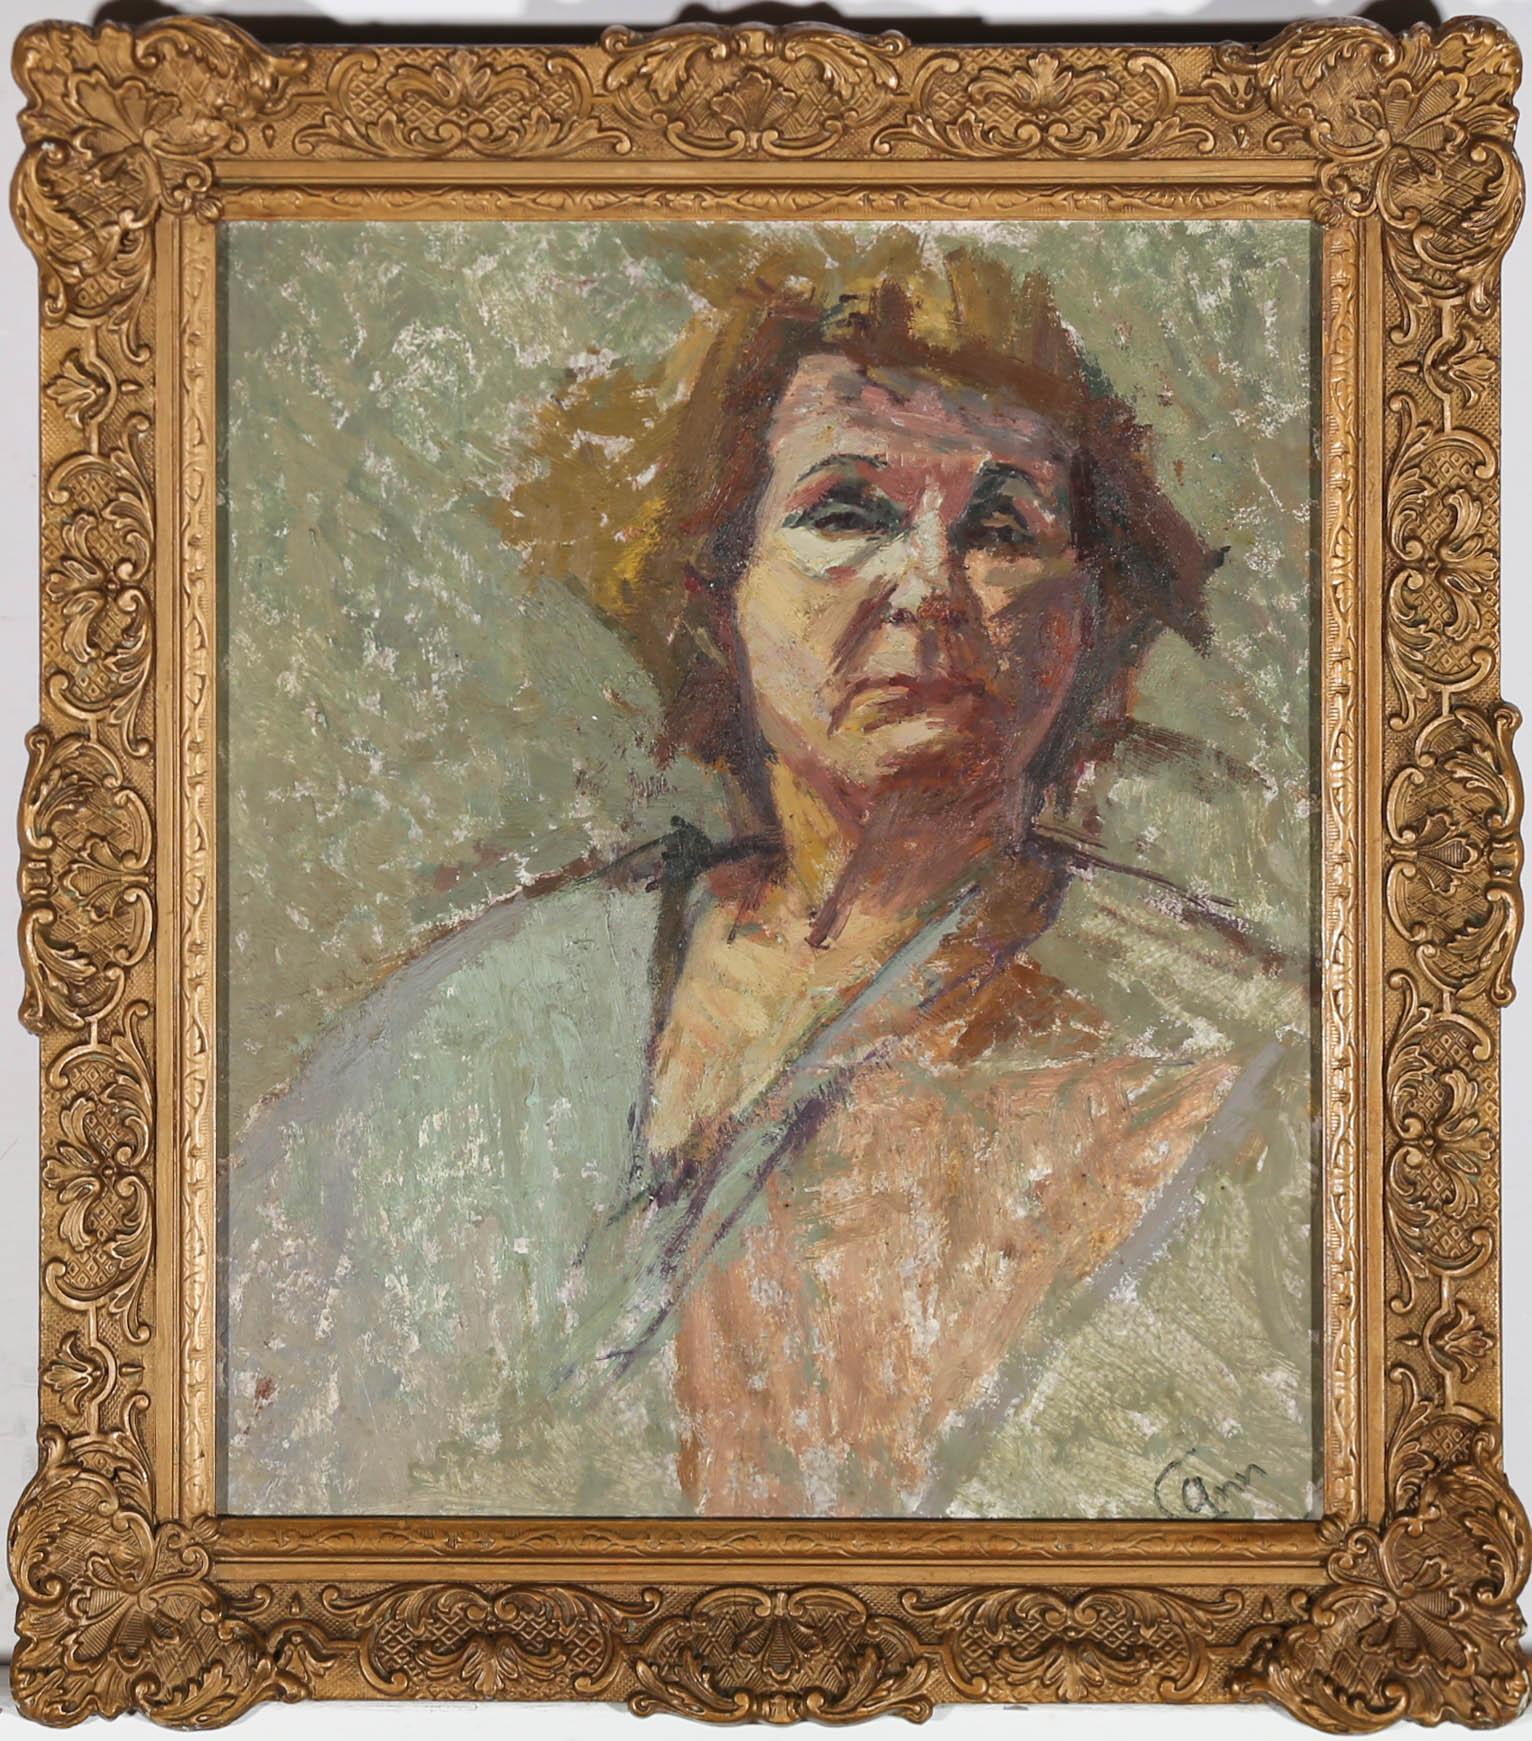 A delightful portrait of a middle-aged woman painted in an expressive style. Signed 'Can' to the lower right. Presented in a gilt frame. On board.